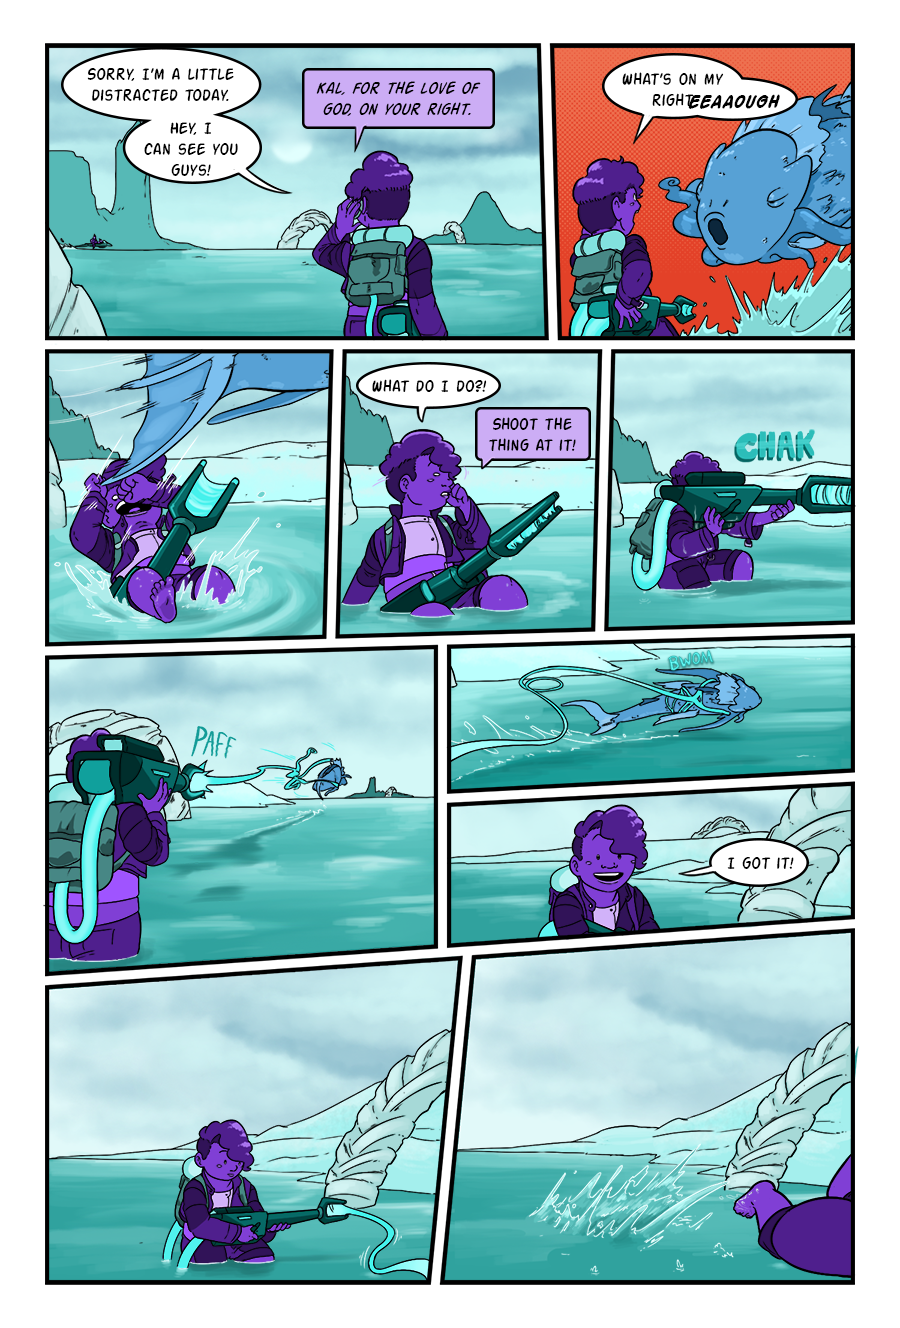 Chapter 2 Page 04